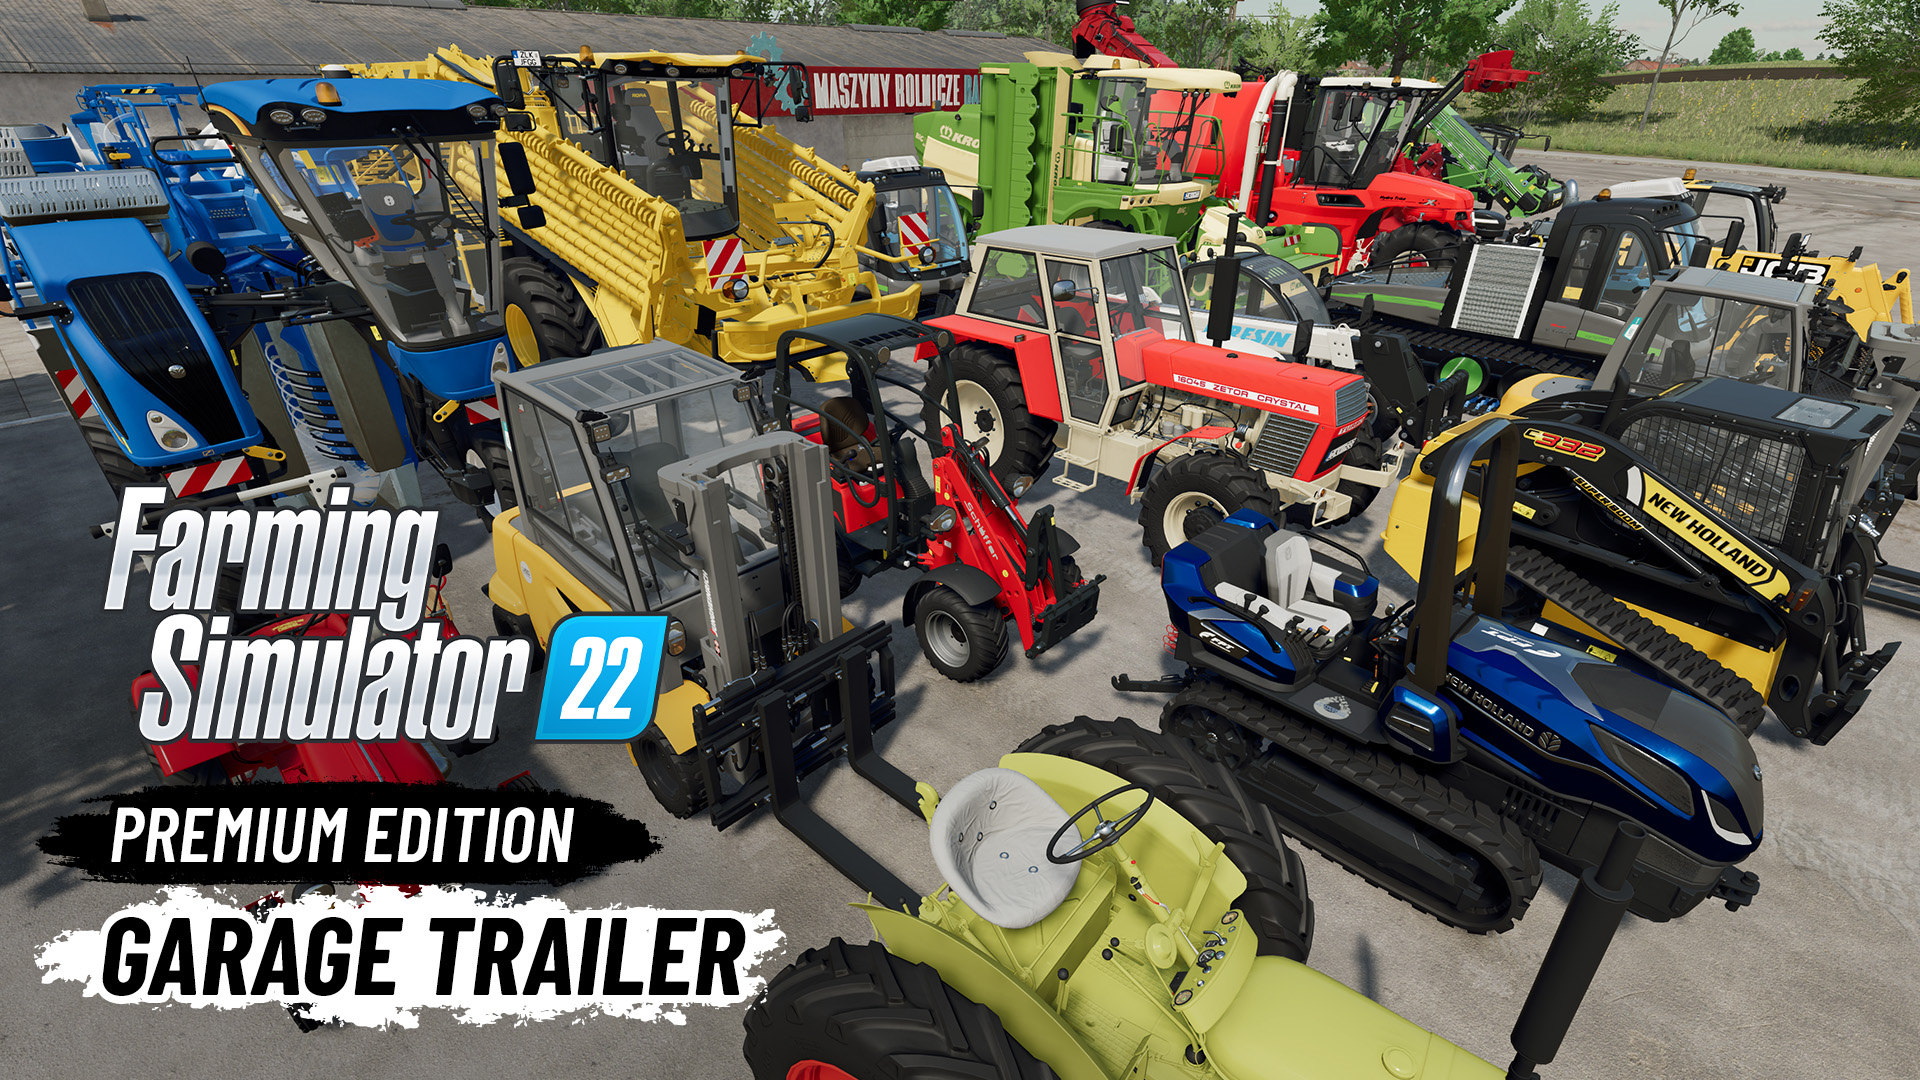 Garage Extension Coming To Farming Simulator 22 With The Latest Premium Expansion